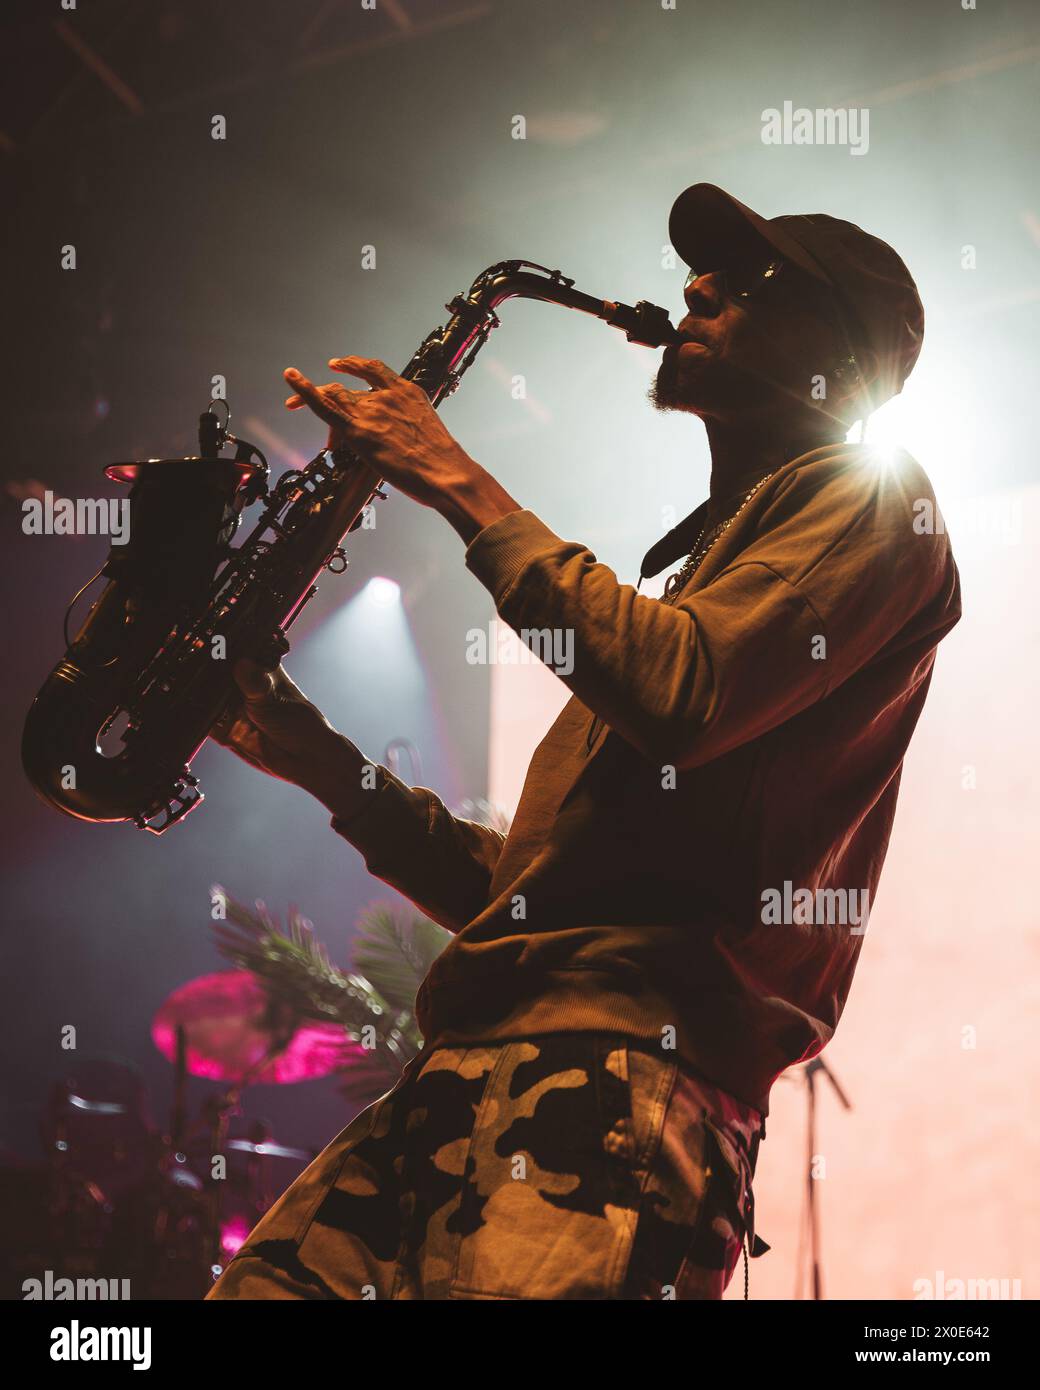 BARCELONA - FEB 6: Masego (Jamaican-American musician and saxophone player) performs on stage at Razzmatazz club on February 6, 2024 in Barcelona, Spa Stock Photo